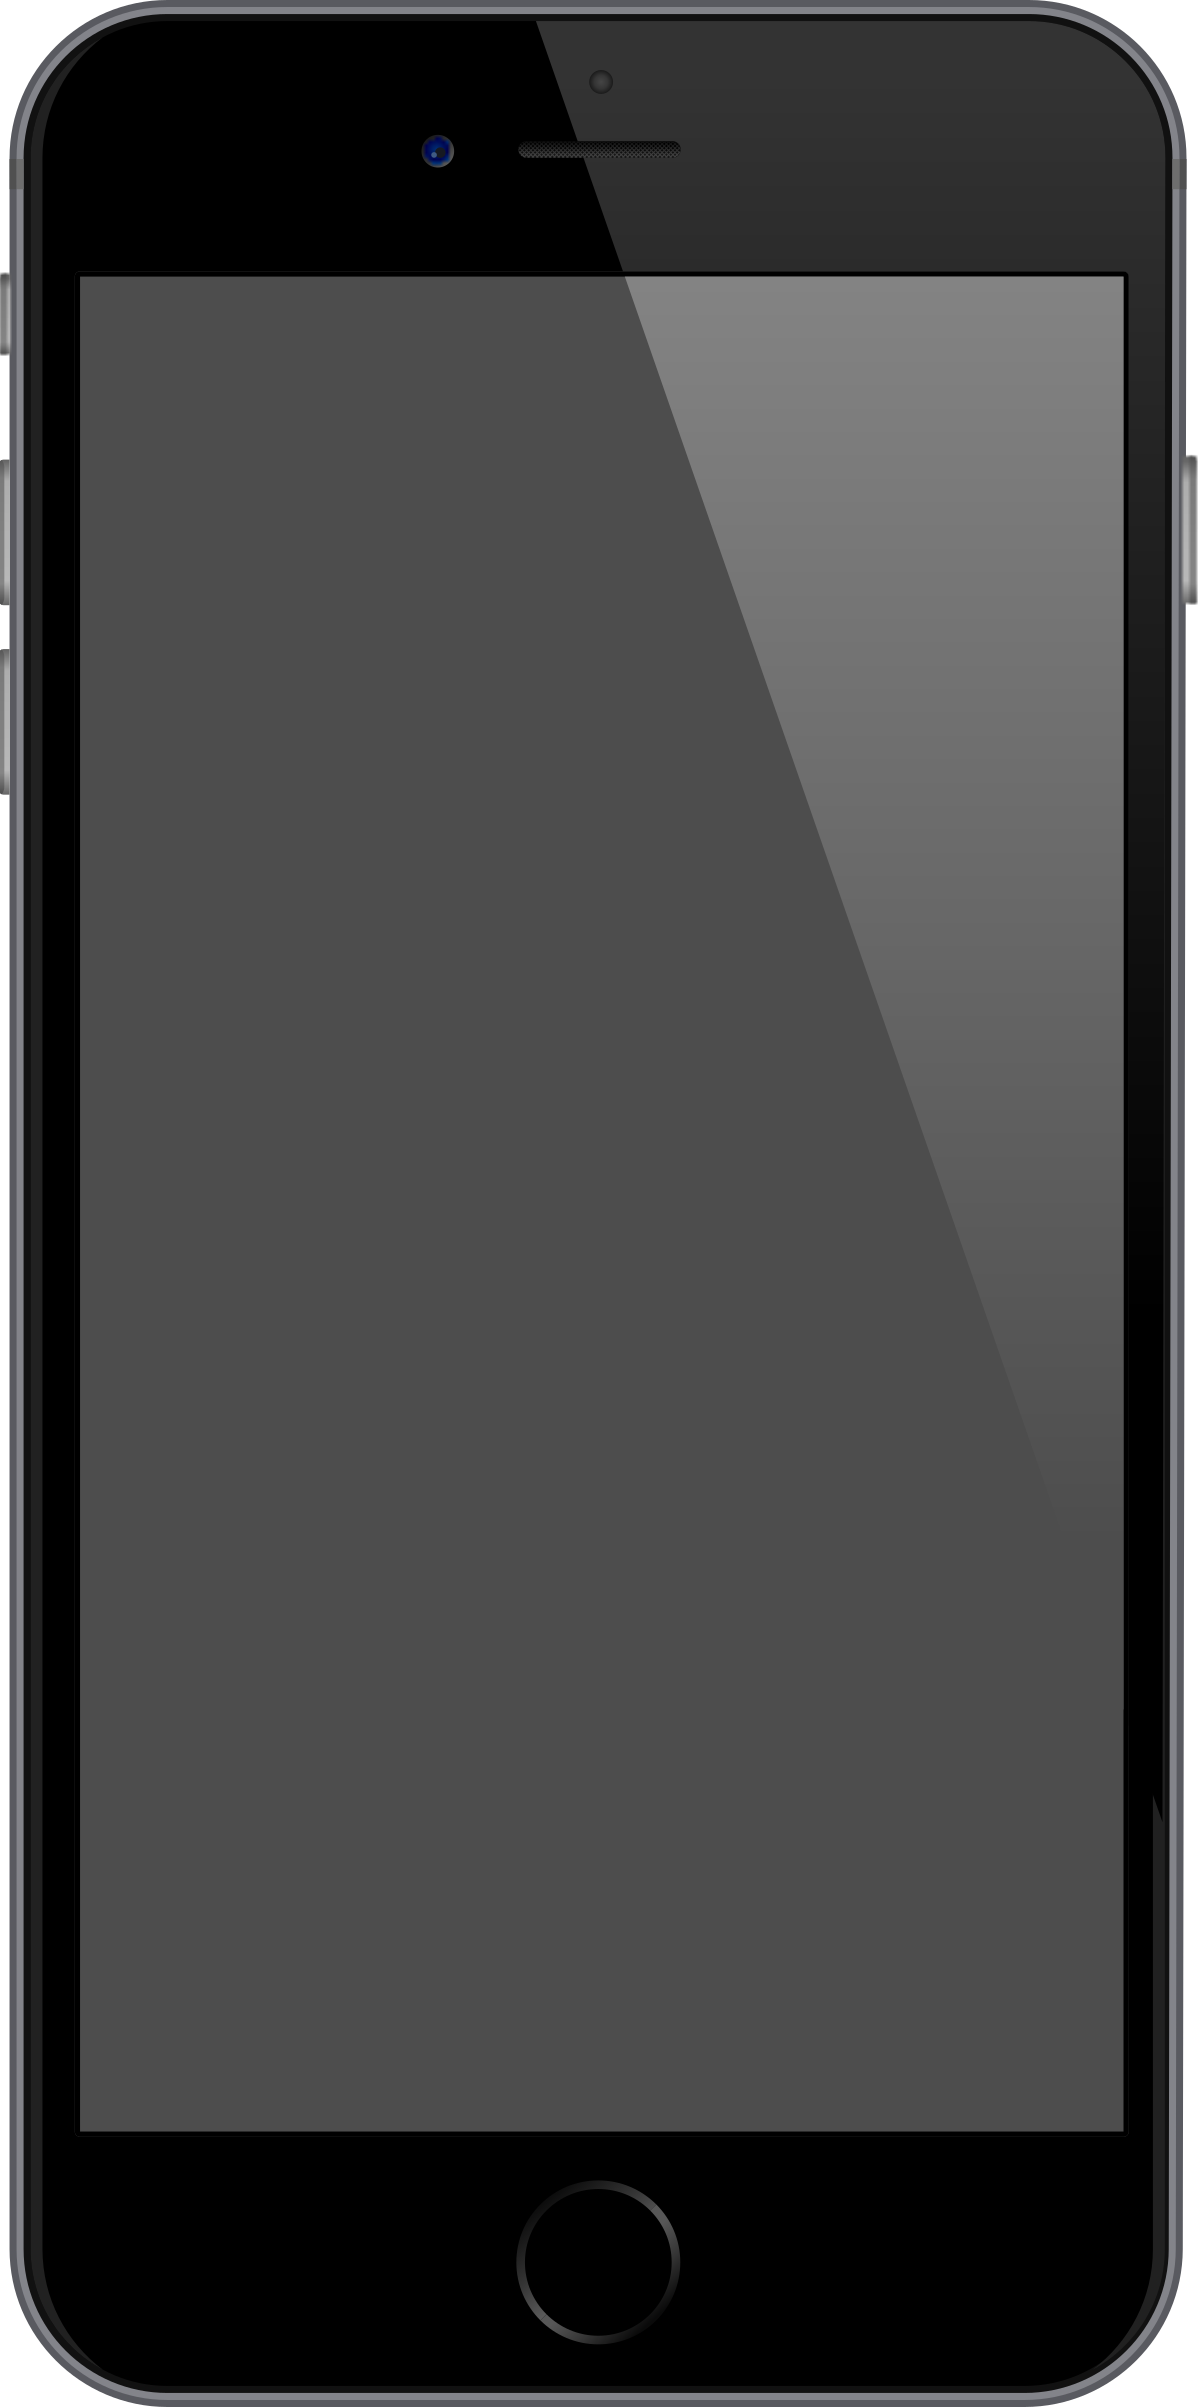 File:IPhone 6 Plus Space Gray.svg.